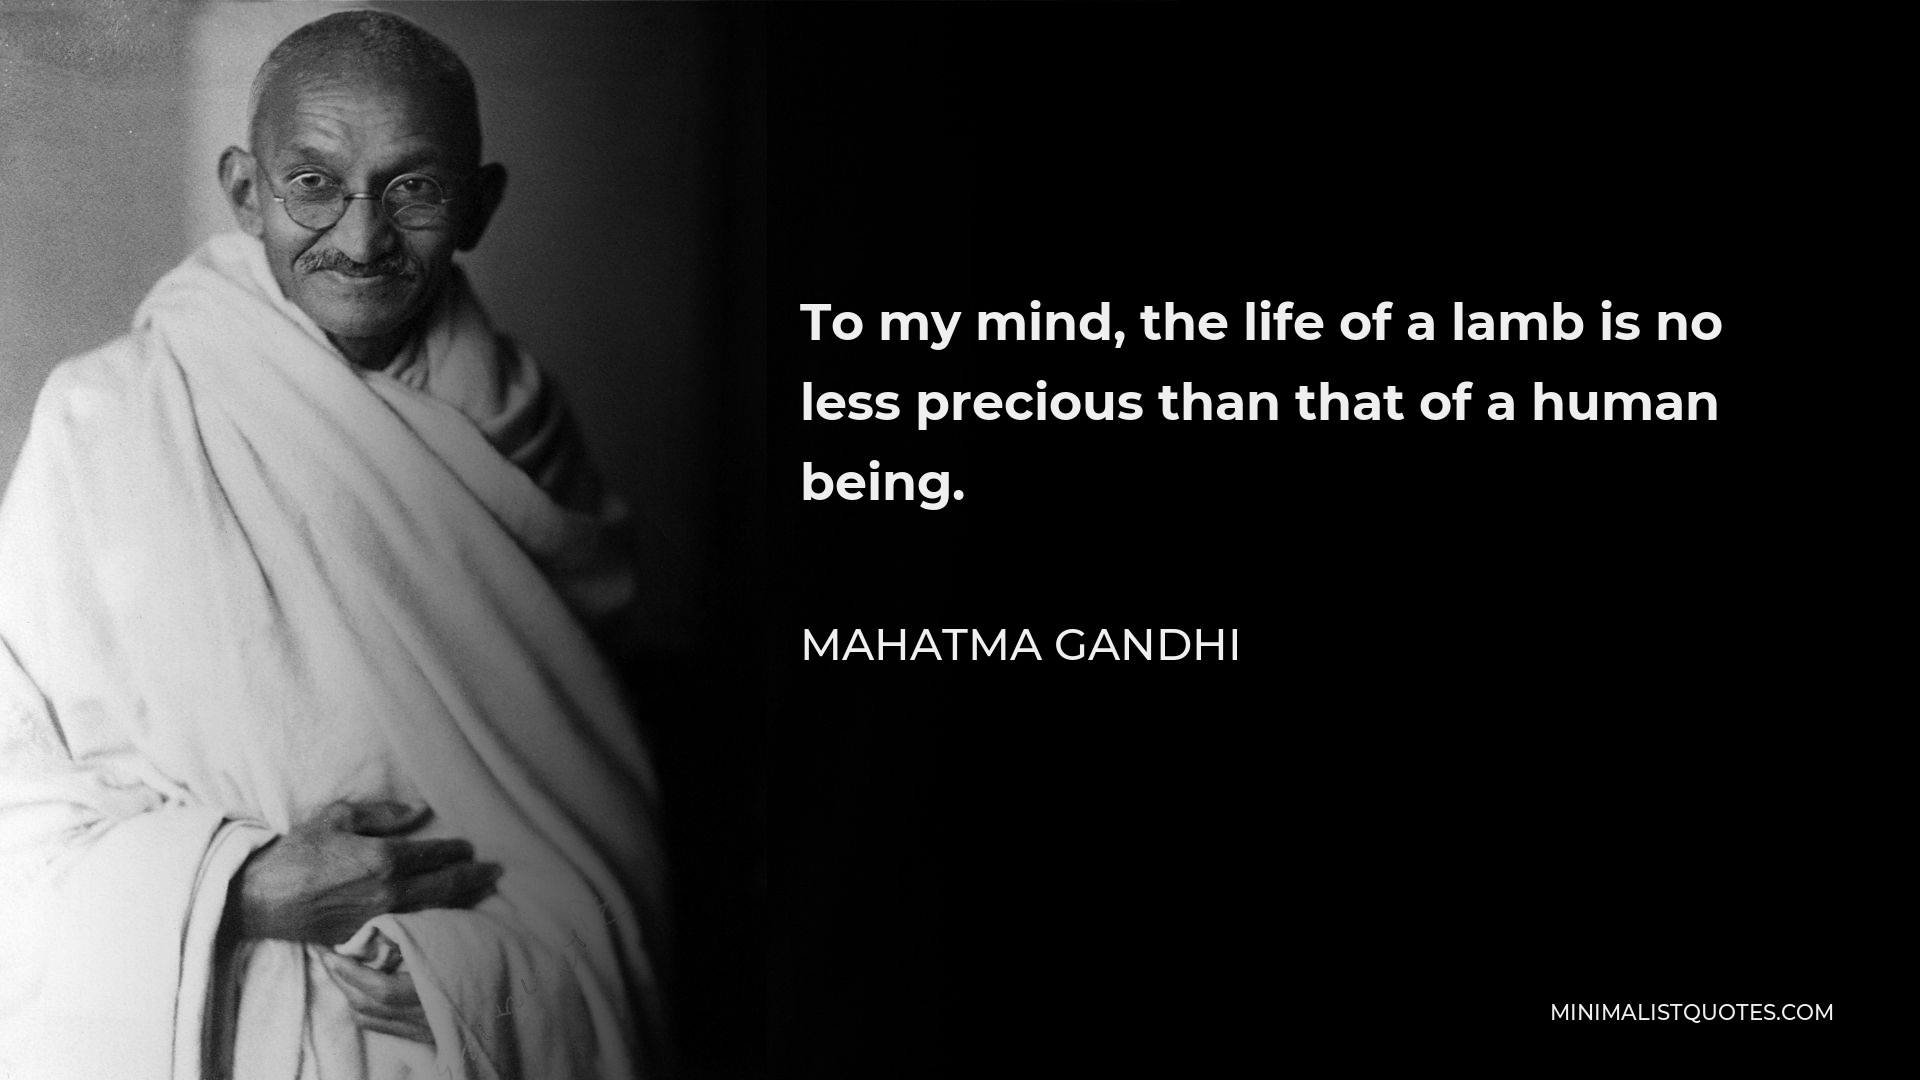 Mahatma Gandhi Quote: To my mind, the life of a lamb is no less ...